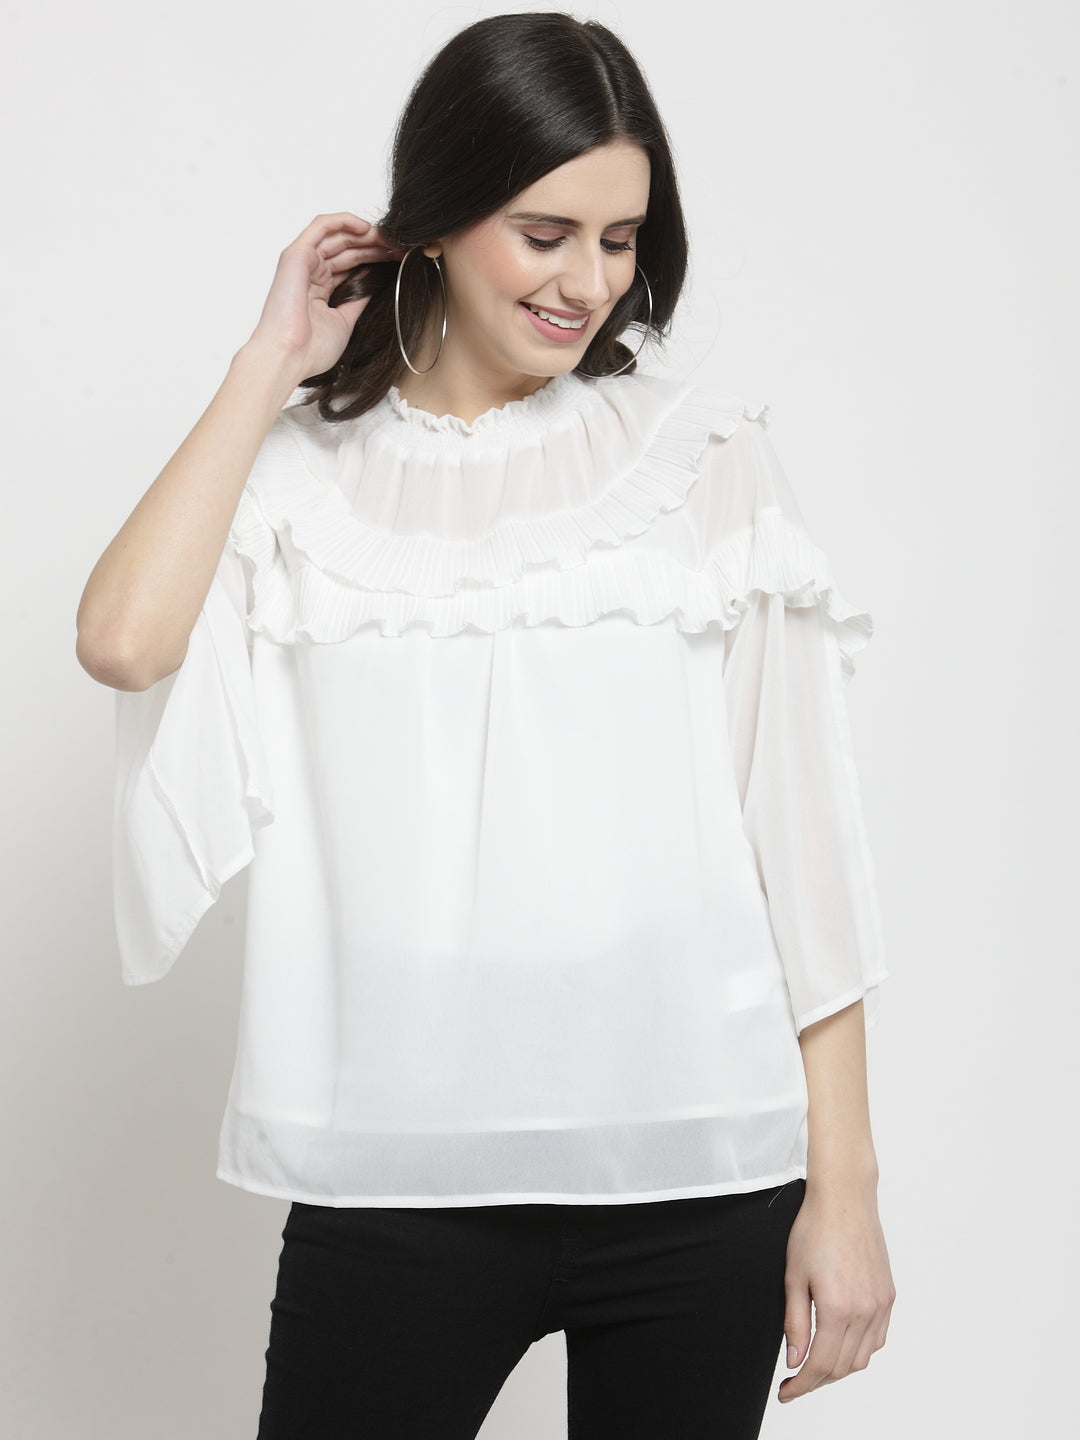 Women Solid Off-White Round Neck Top With Frills